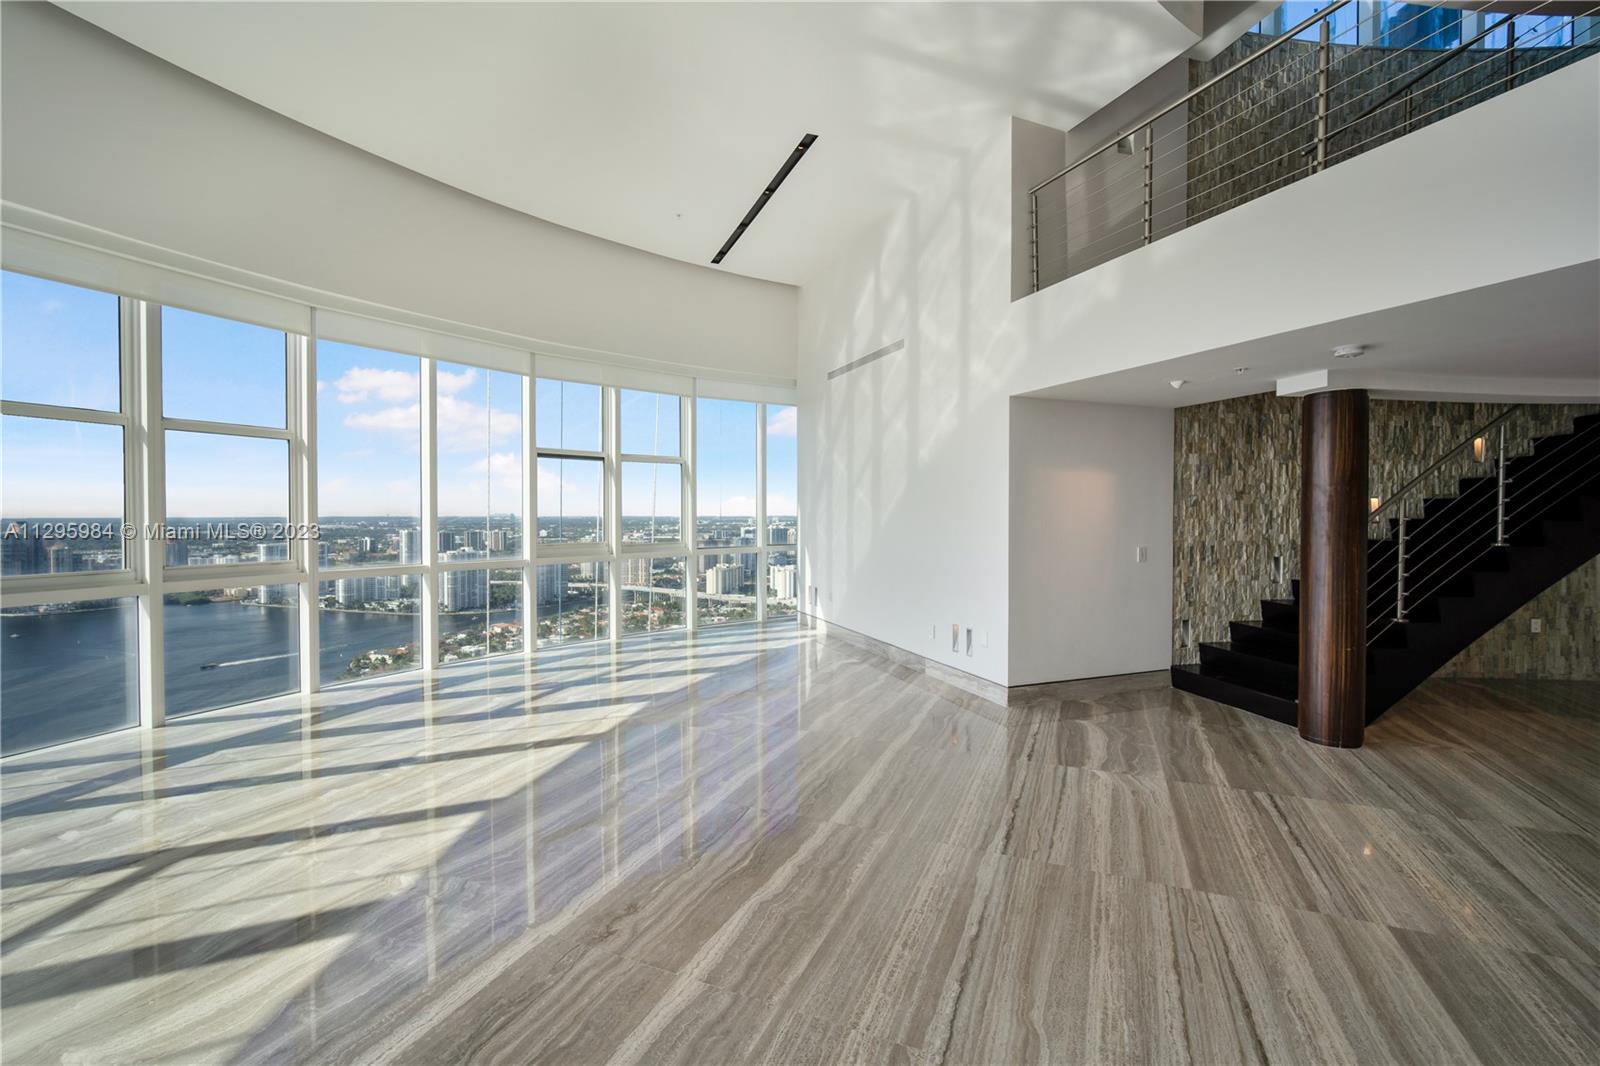 Totally remodeled. This fantastic PH on the 55th floor has a living room with soaring 22-foot ceiling, a one of a kind & customized floor plan, and personalized luxe upgrades ready to accommodate designer taste. The space is two floors of 5,727 Sqft of interior living and 1,500 (more or less) Sqft of outdoor terrace, with a private pool and jacuzzi overlooking the ocean and city skyline. The 2 kitchen is state of the art from Poliform with Axor and Hansgrobe fixtures,marble countertops, and top-of-the-line appliances from Wolf & Subzero. All the washroom vanities are from Florence, and the wine cellar holds up to 500 bottles. The master bedroom and washroom enjoy skyscraper views of the ocean. This paradise is perfect for entertaining, with spacious terraces overlooking the Ocean and city.